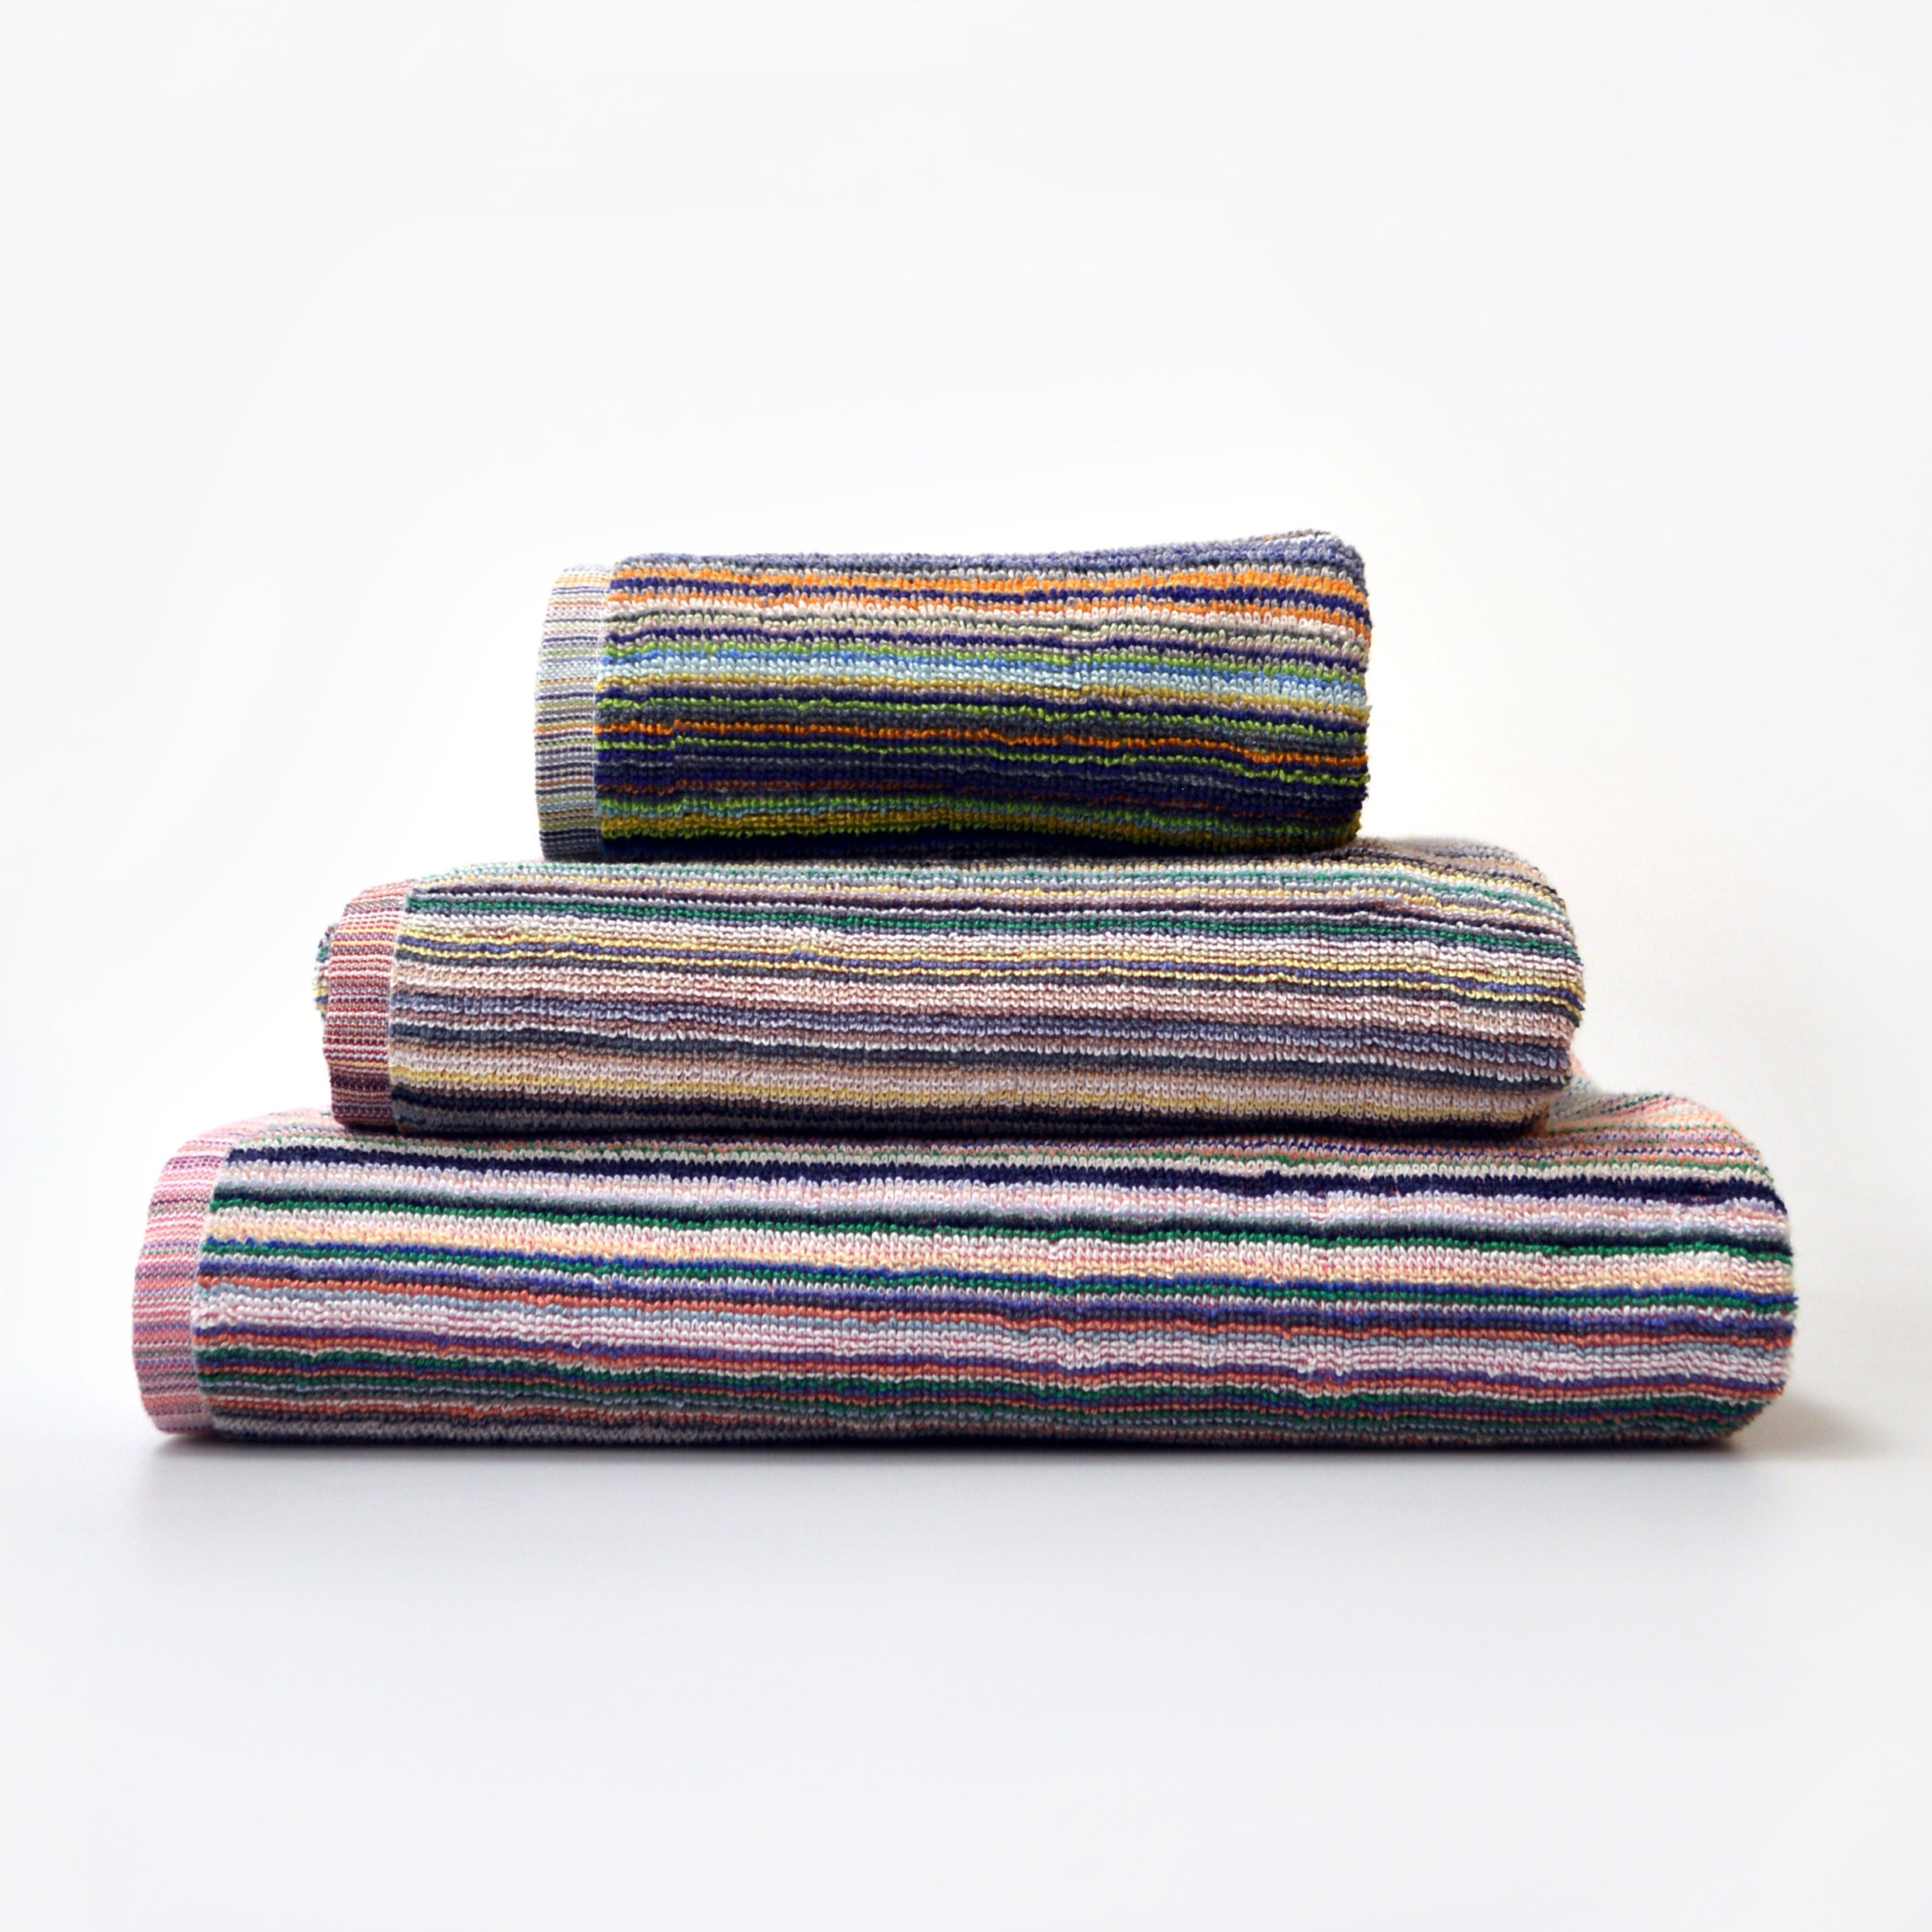 recycled cotton towels made from remnant yarn. Eco friendly, sustainable striped towels